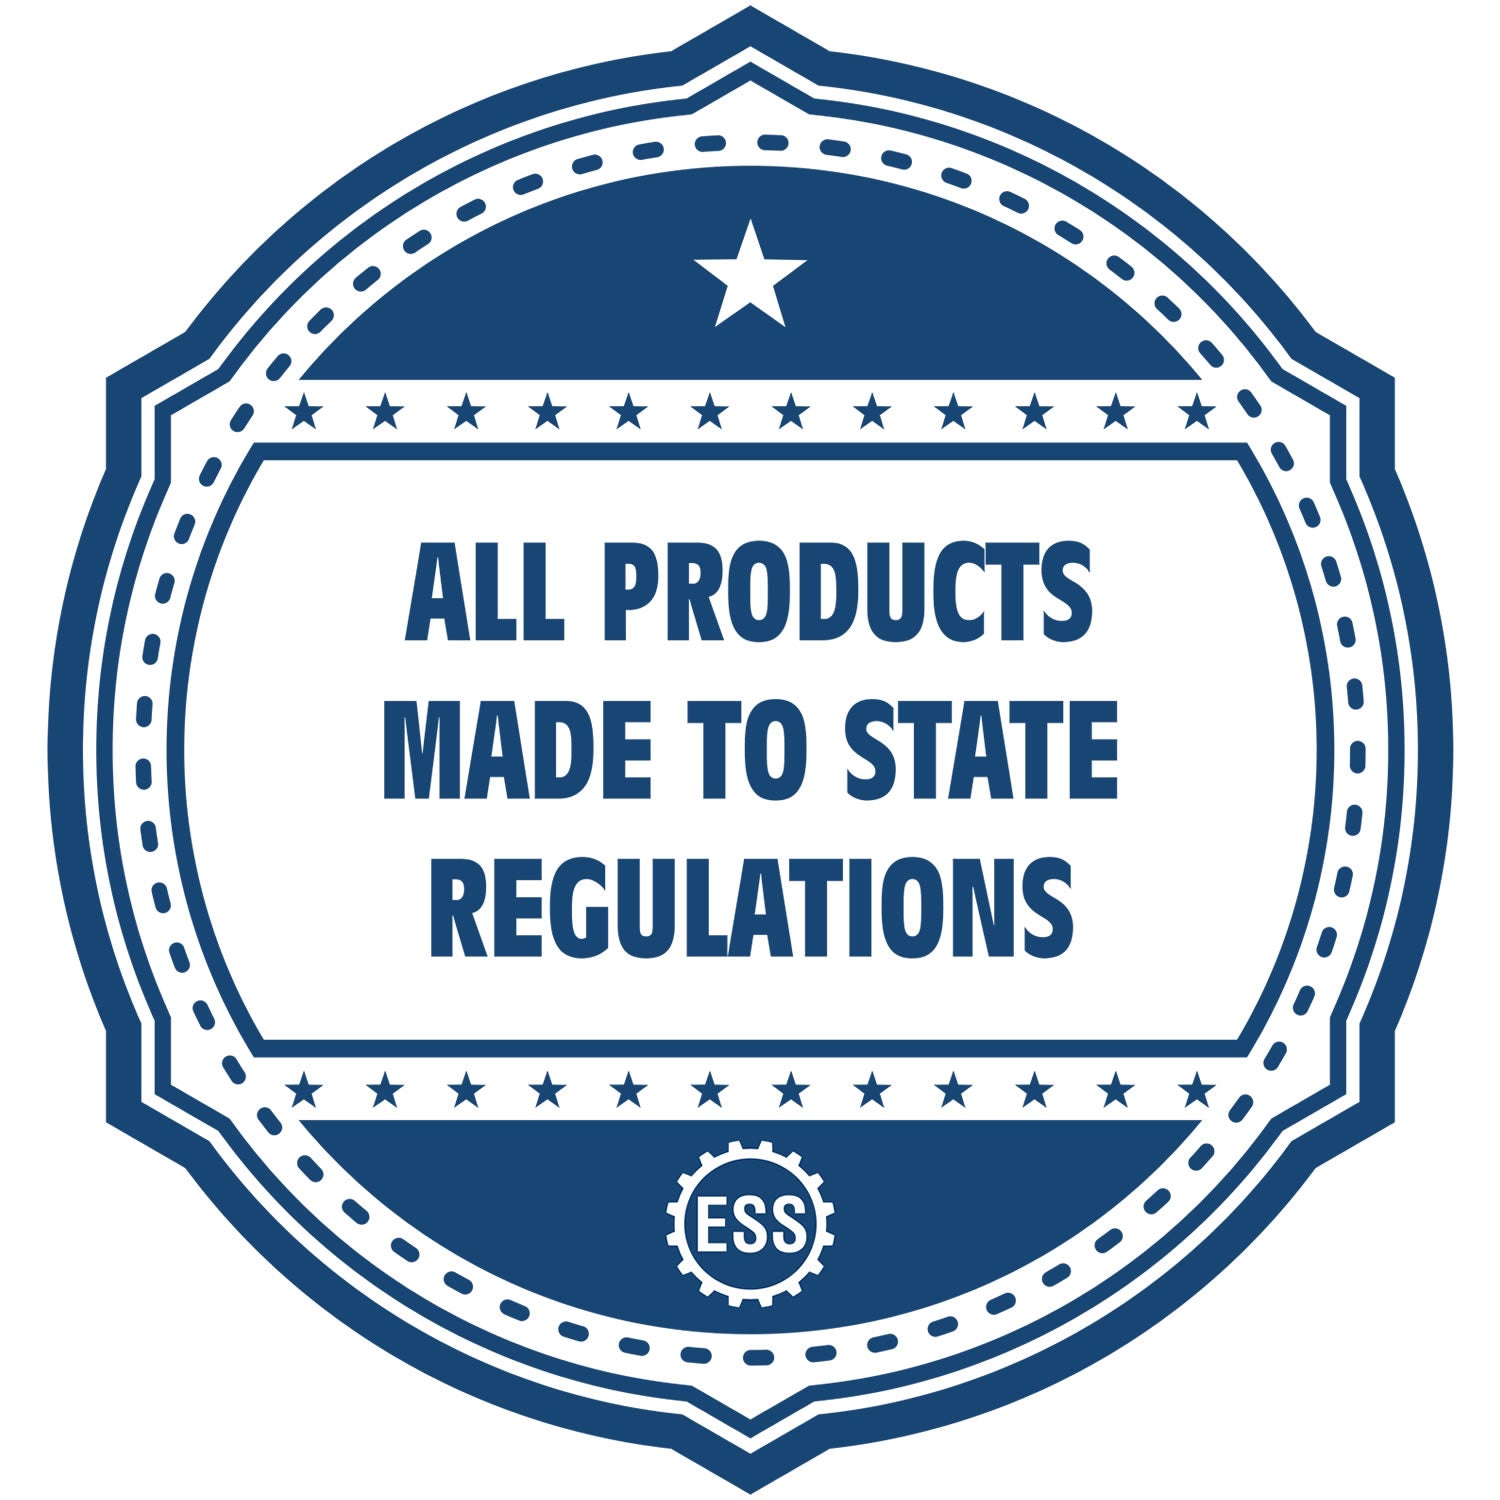 A blue icon or badge for the Gift North Carolina Architect Seal showing that this product is made in compliance with state regulations.